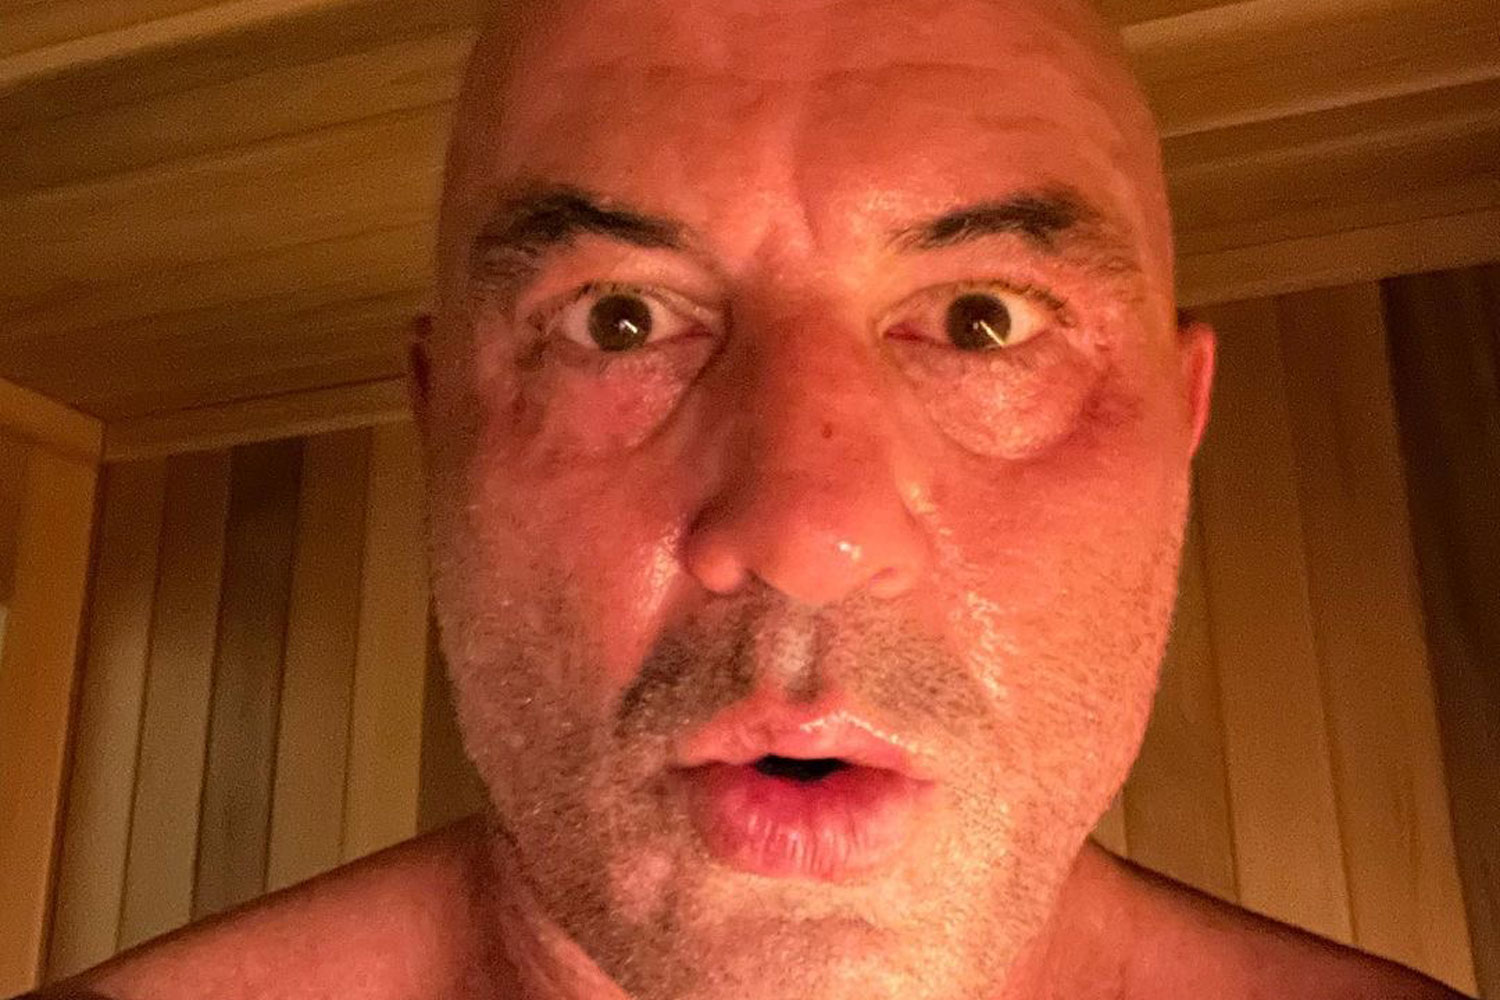 ‘Wild’ Joe Rogan Workout Has Some Fans Worried For His Health